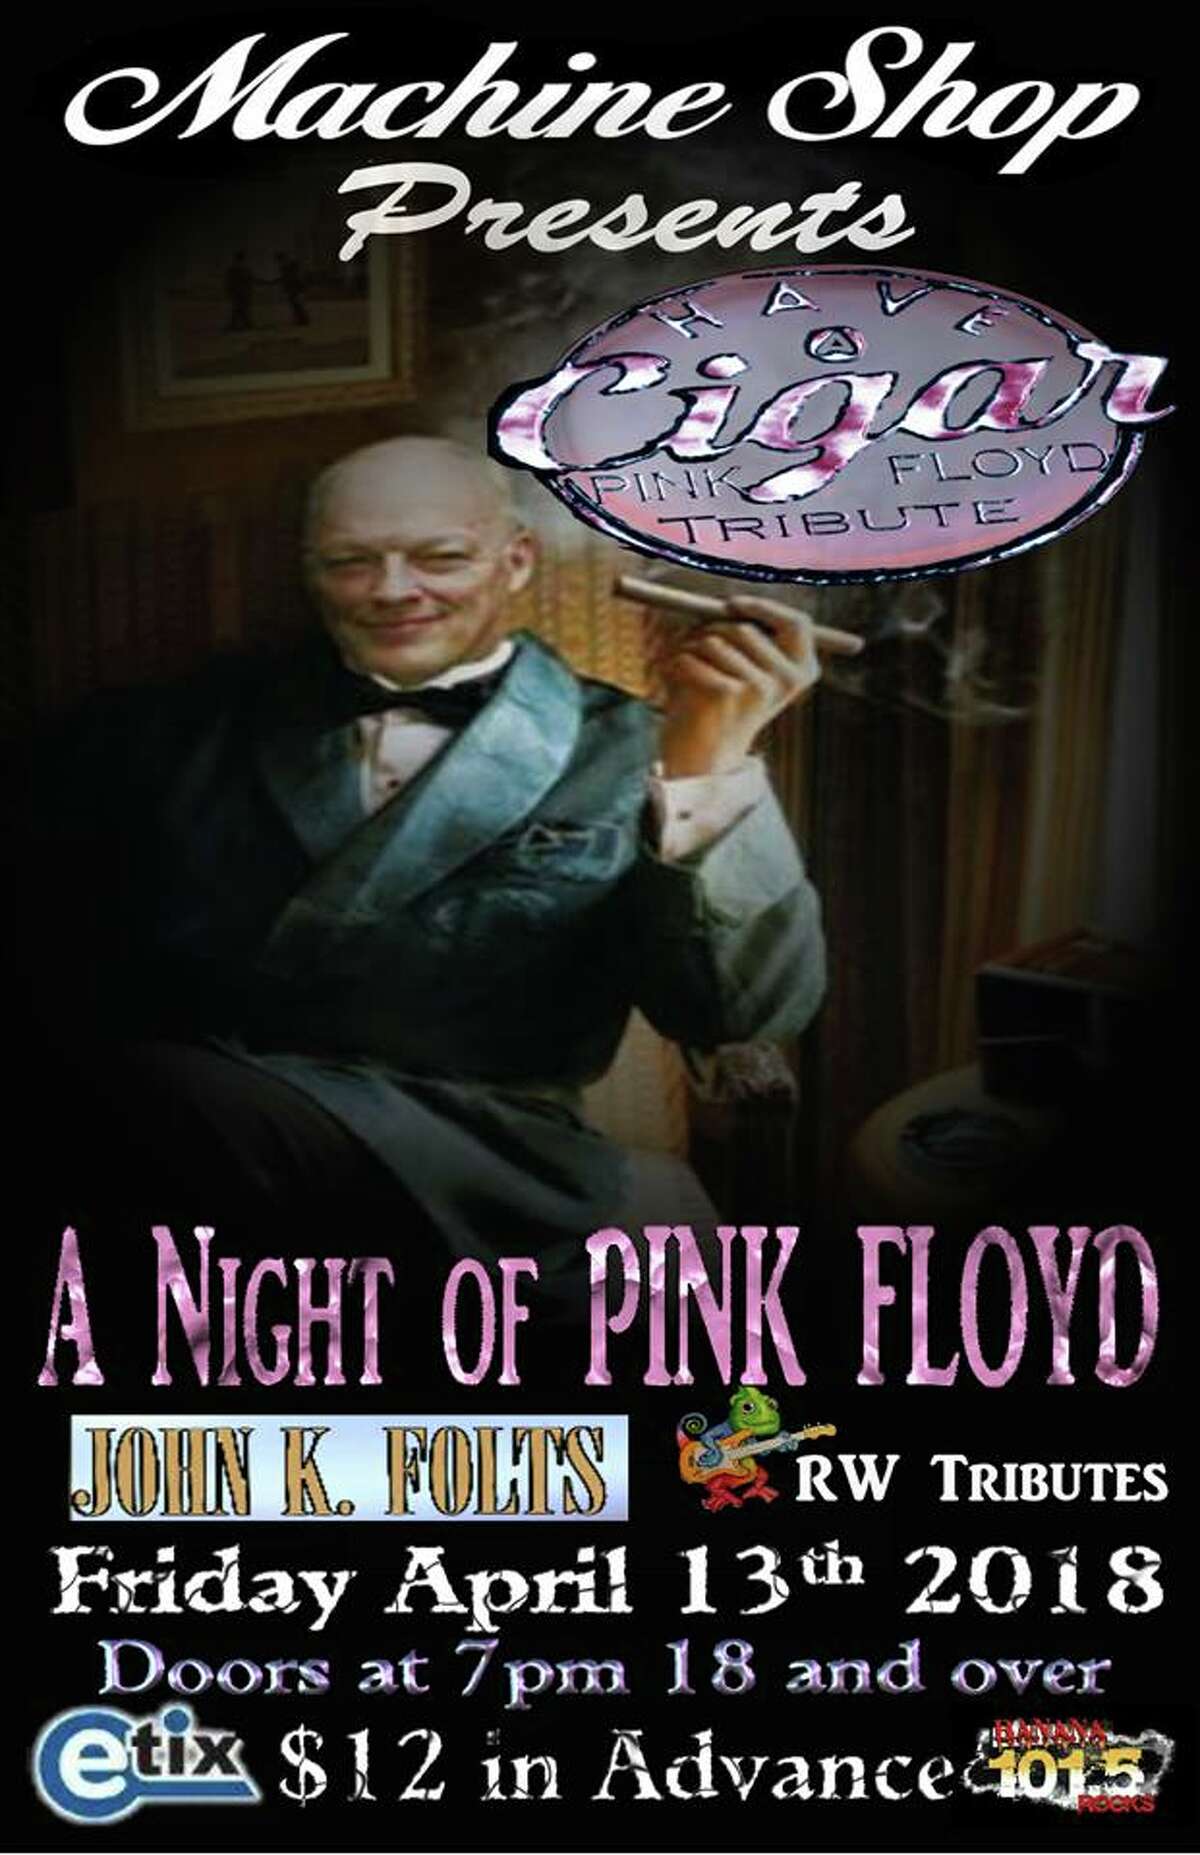 April 13: Have a Cigar, a Pink Floyd tribute, The Machine Shop, Flint, http://www.themachineshop.info